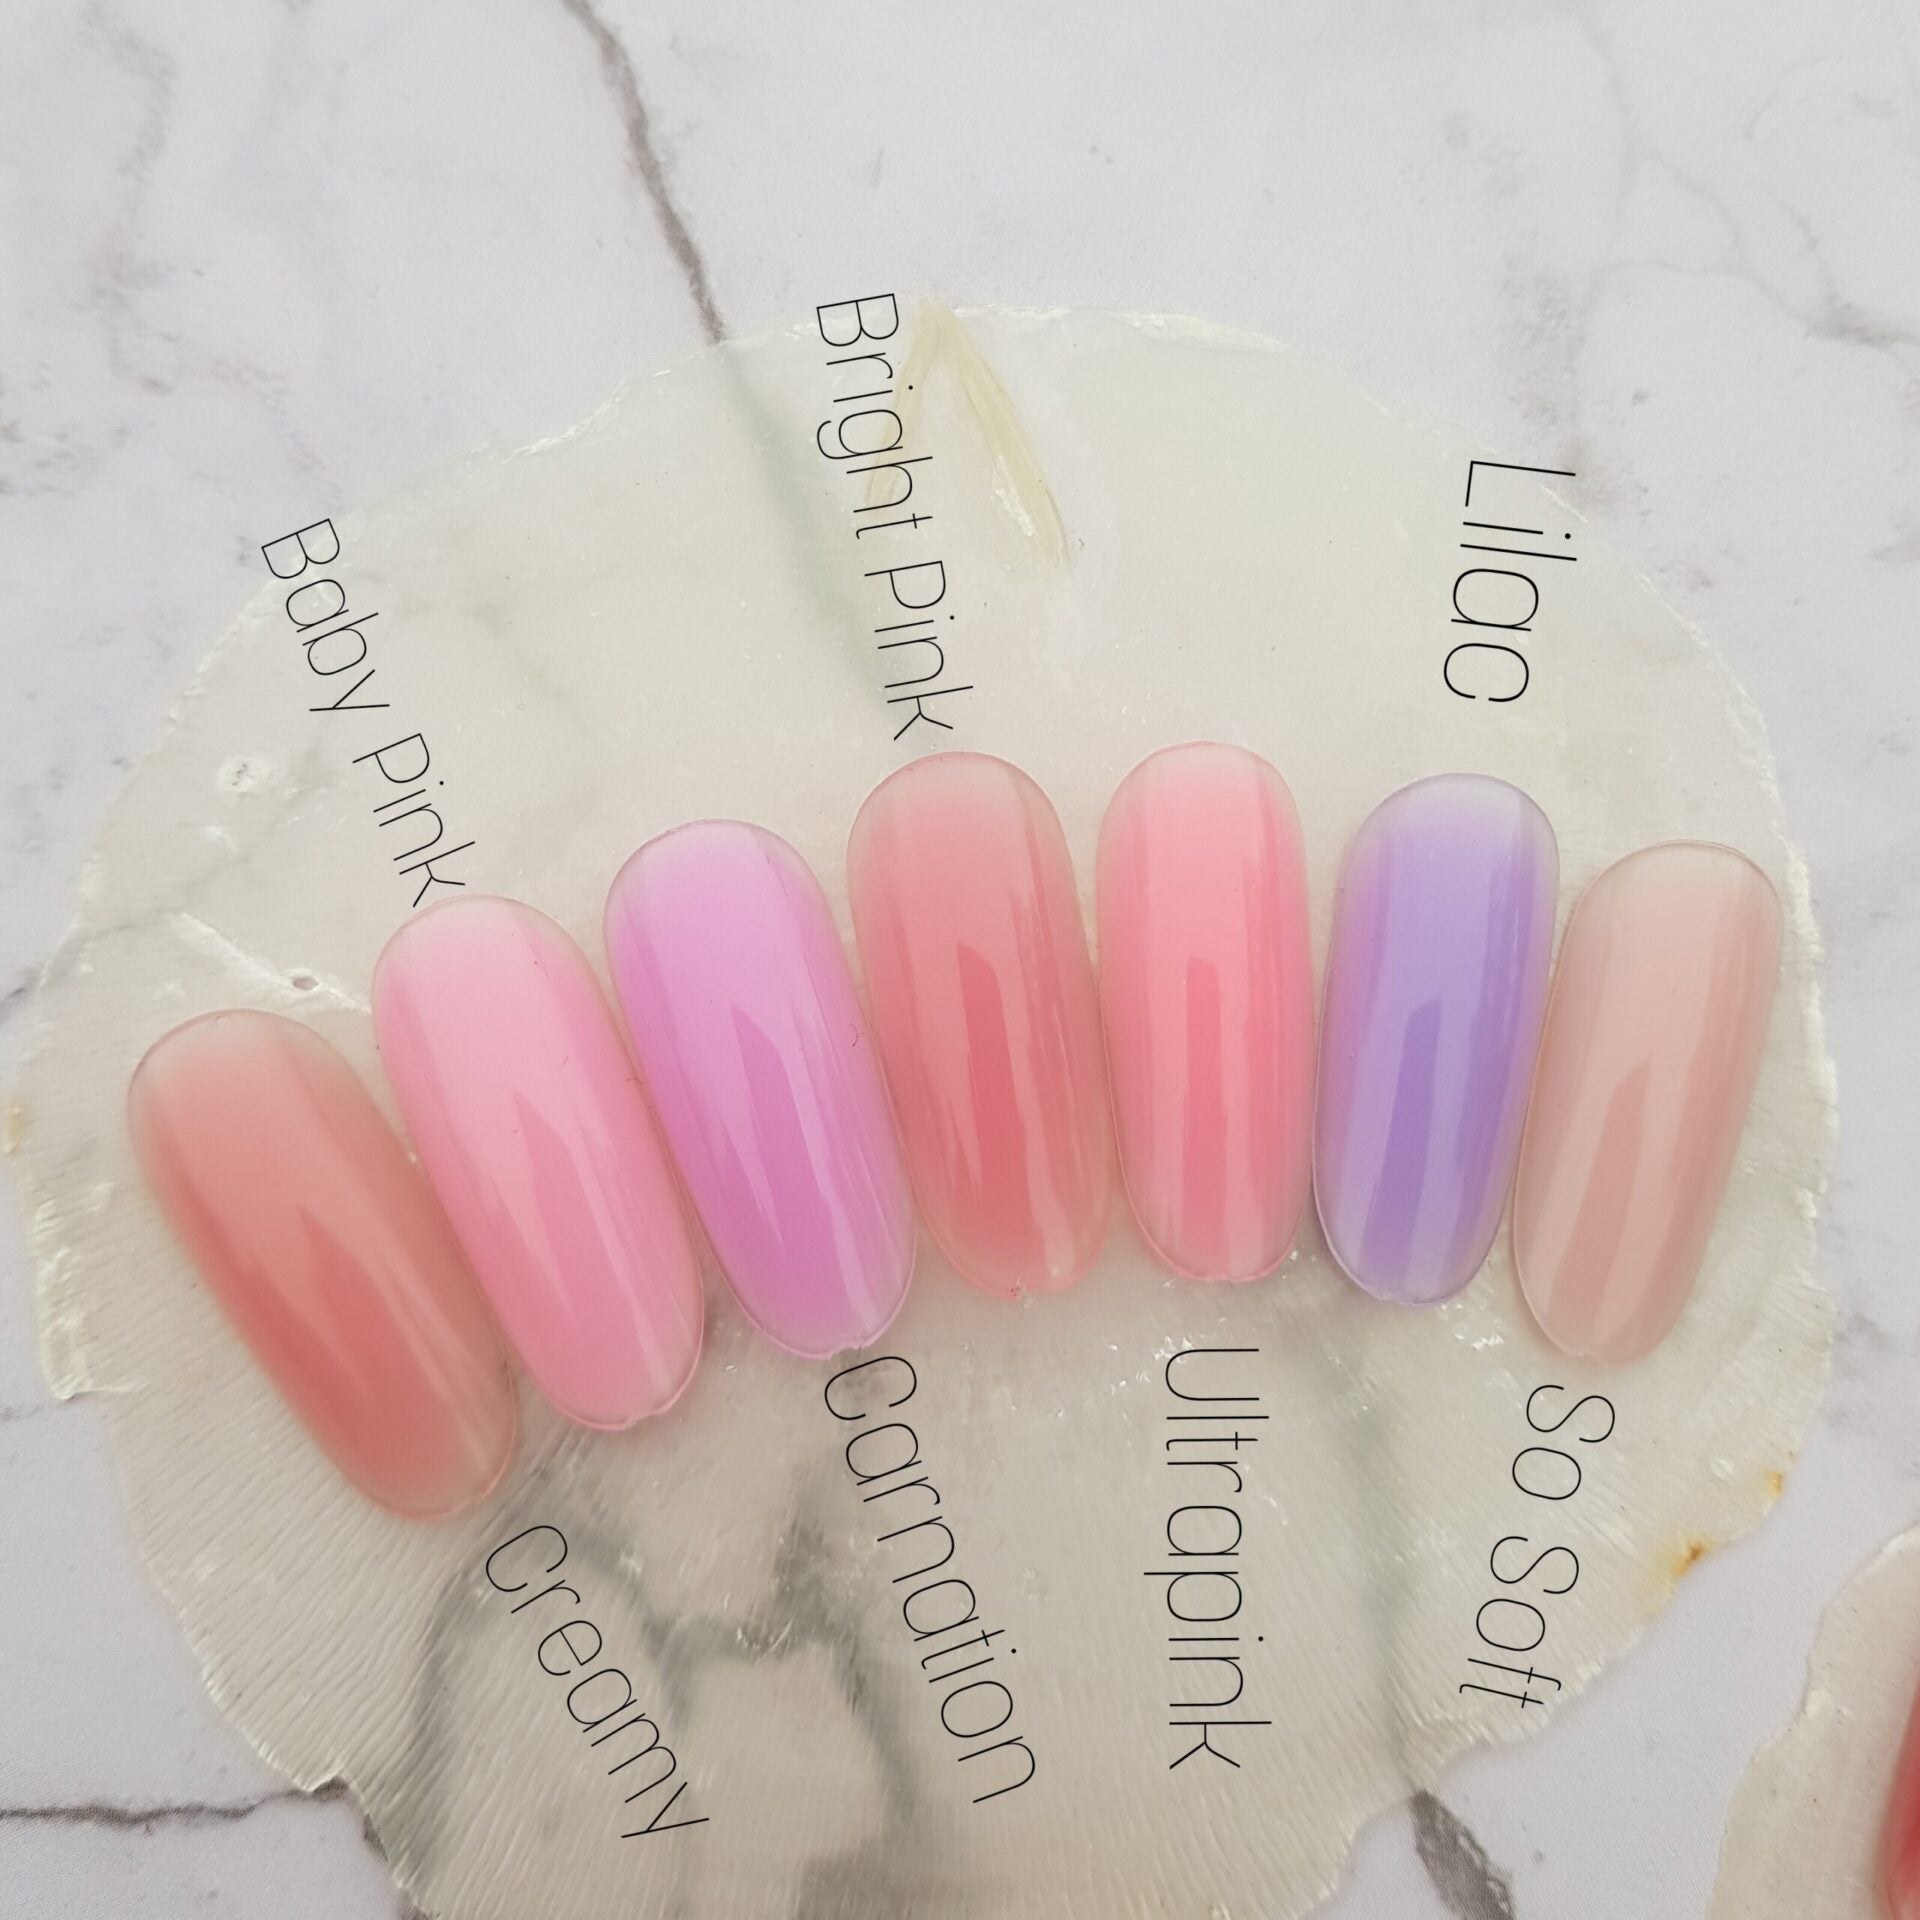 Nail Candy Build It Up! So soft